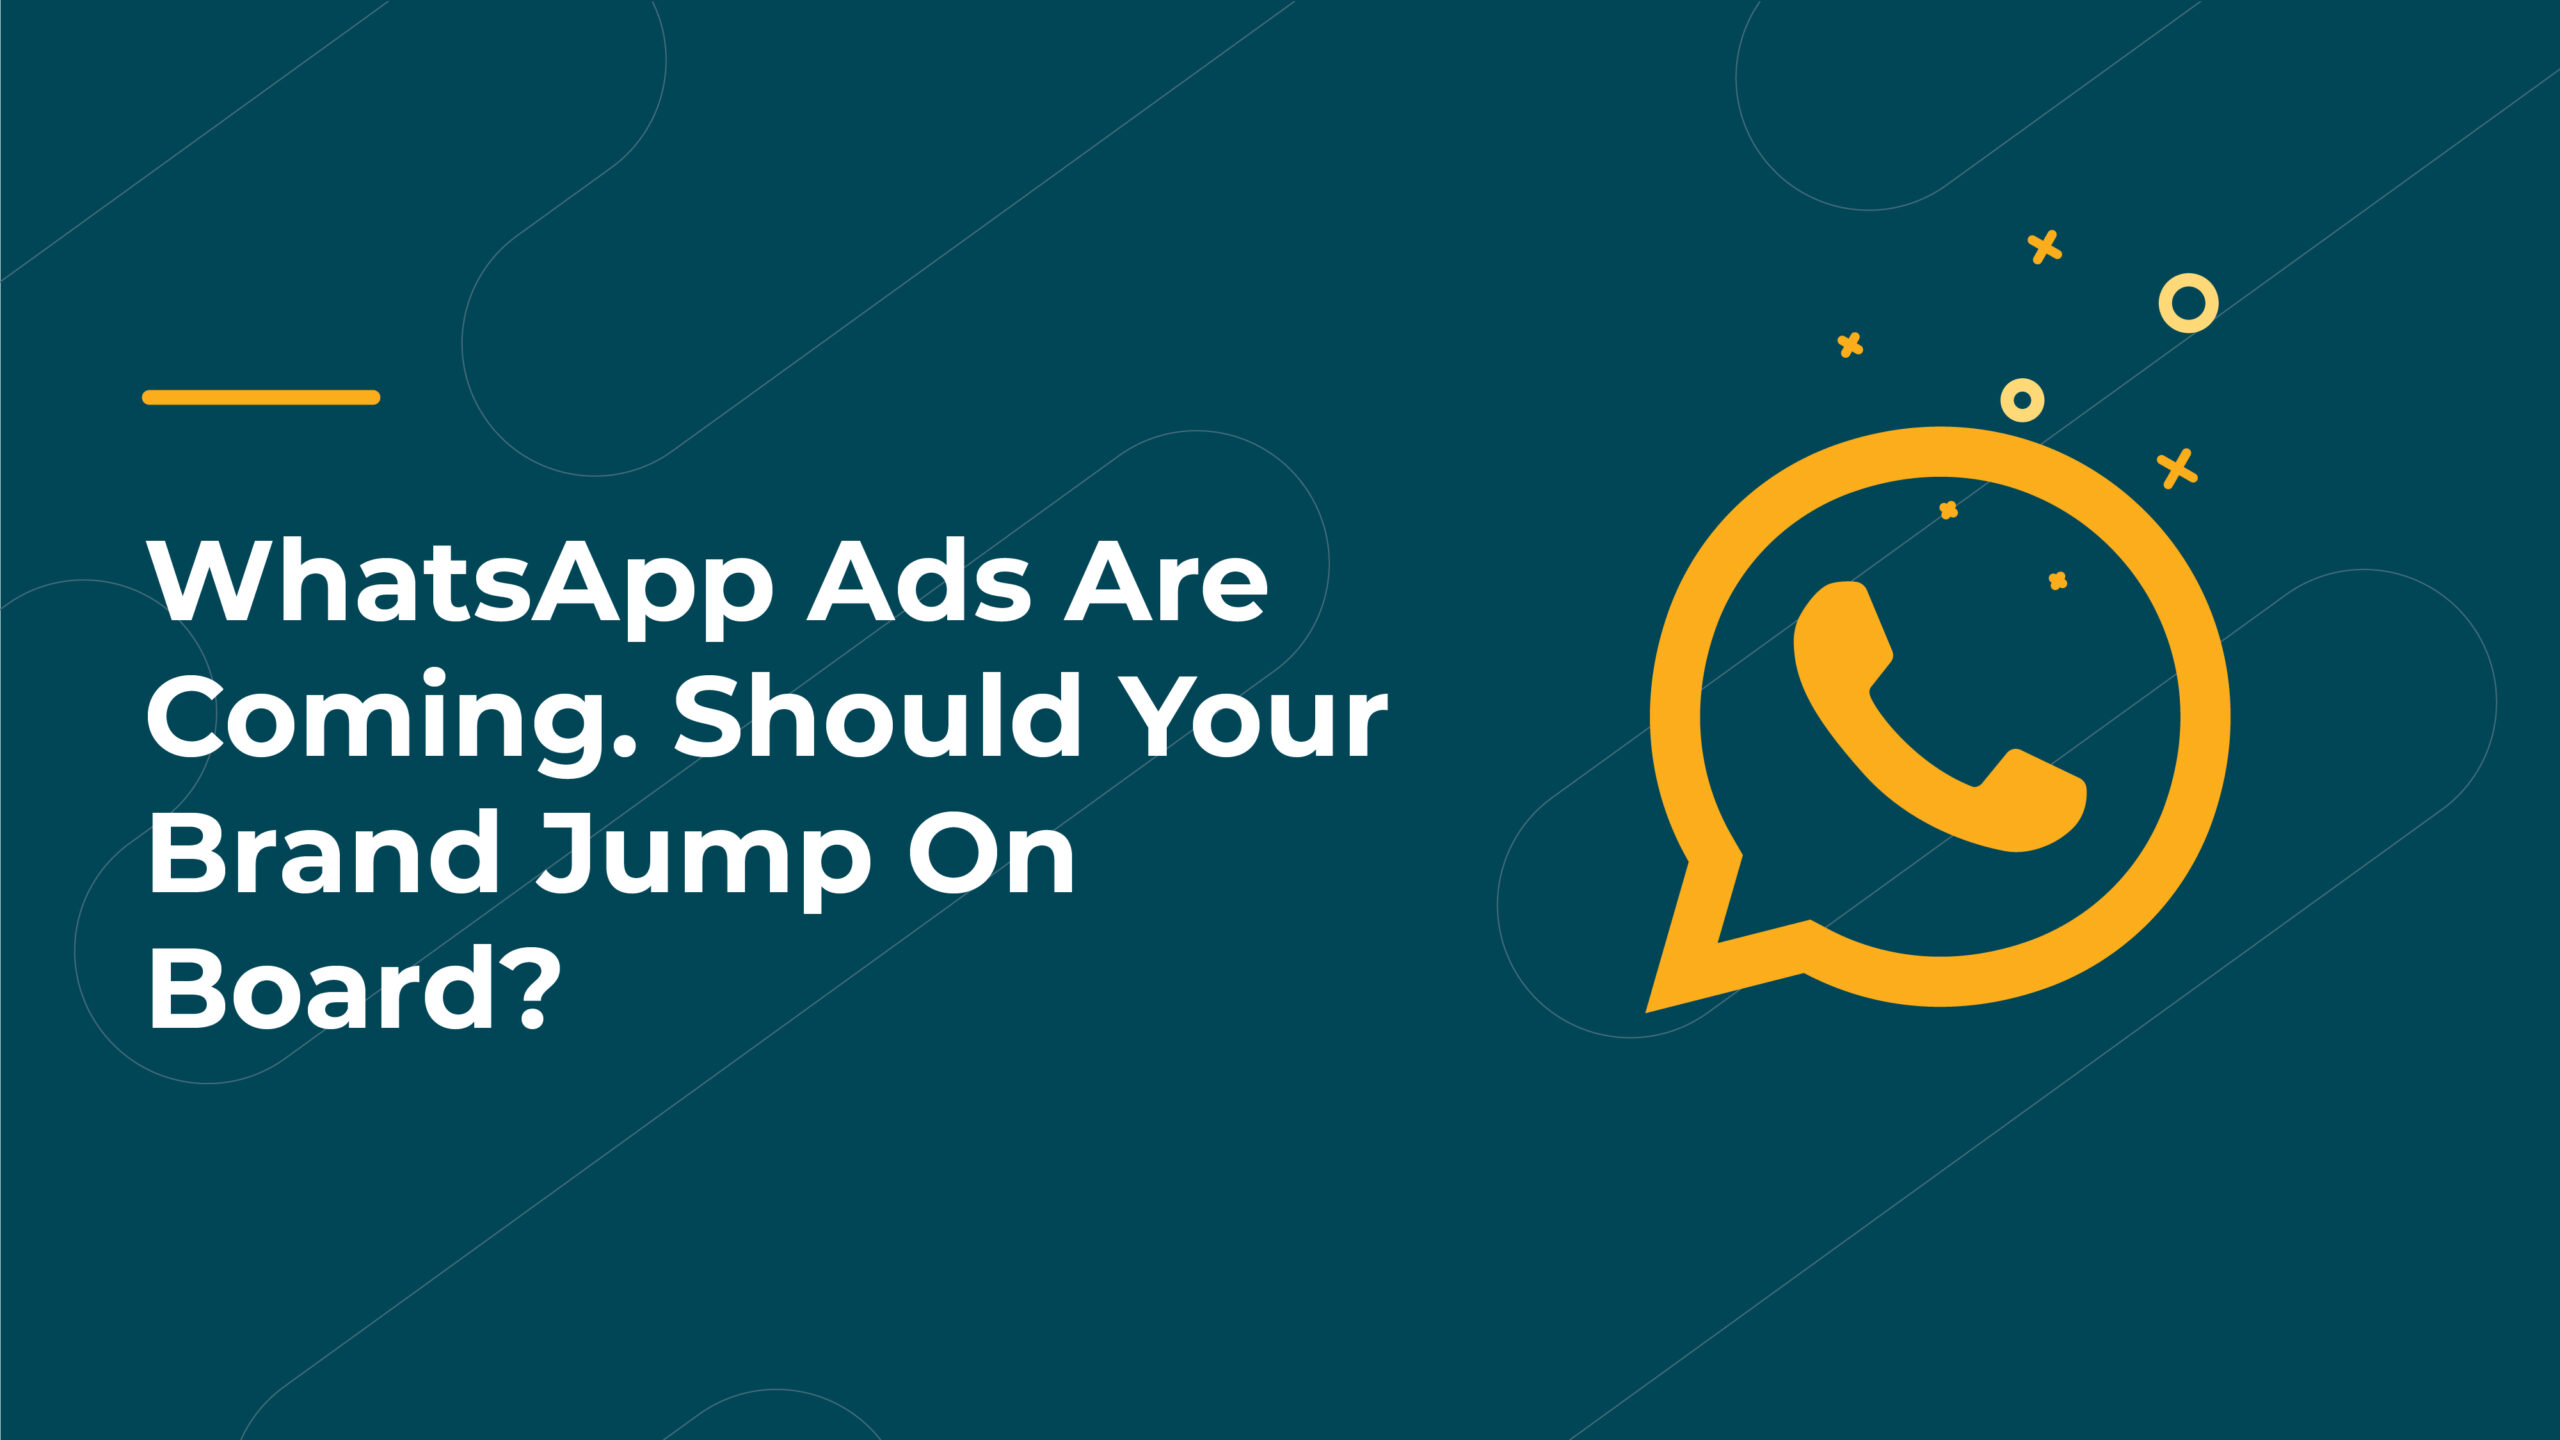 WhatsApp Ads Are Coming. Should Your Brand Jump On Board?